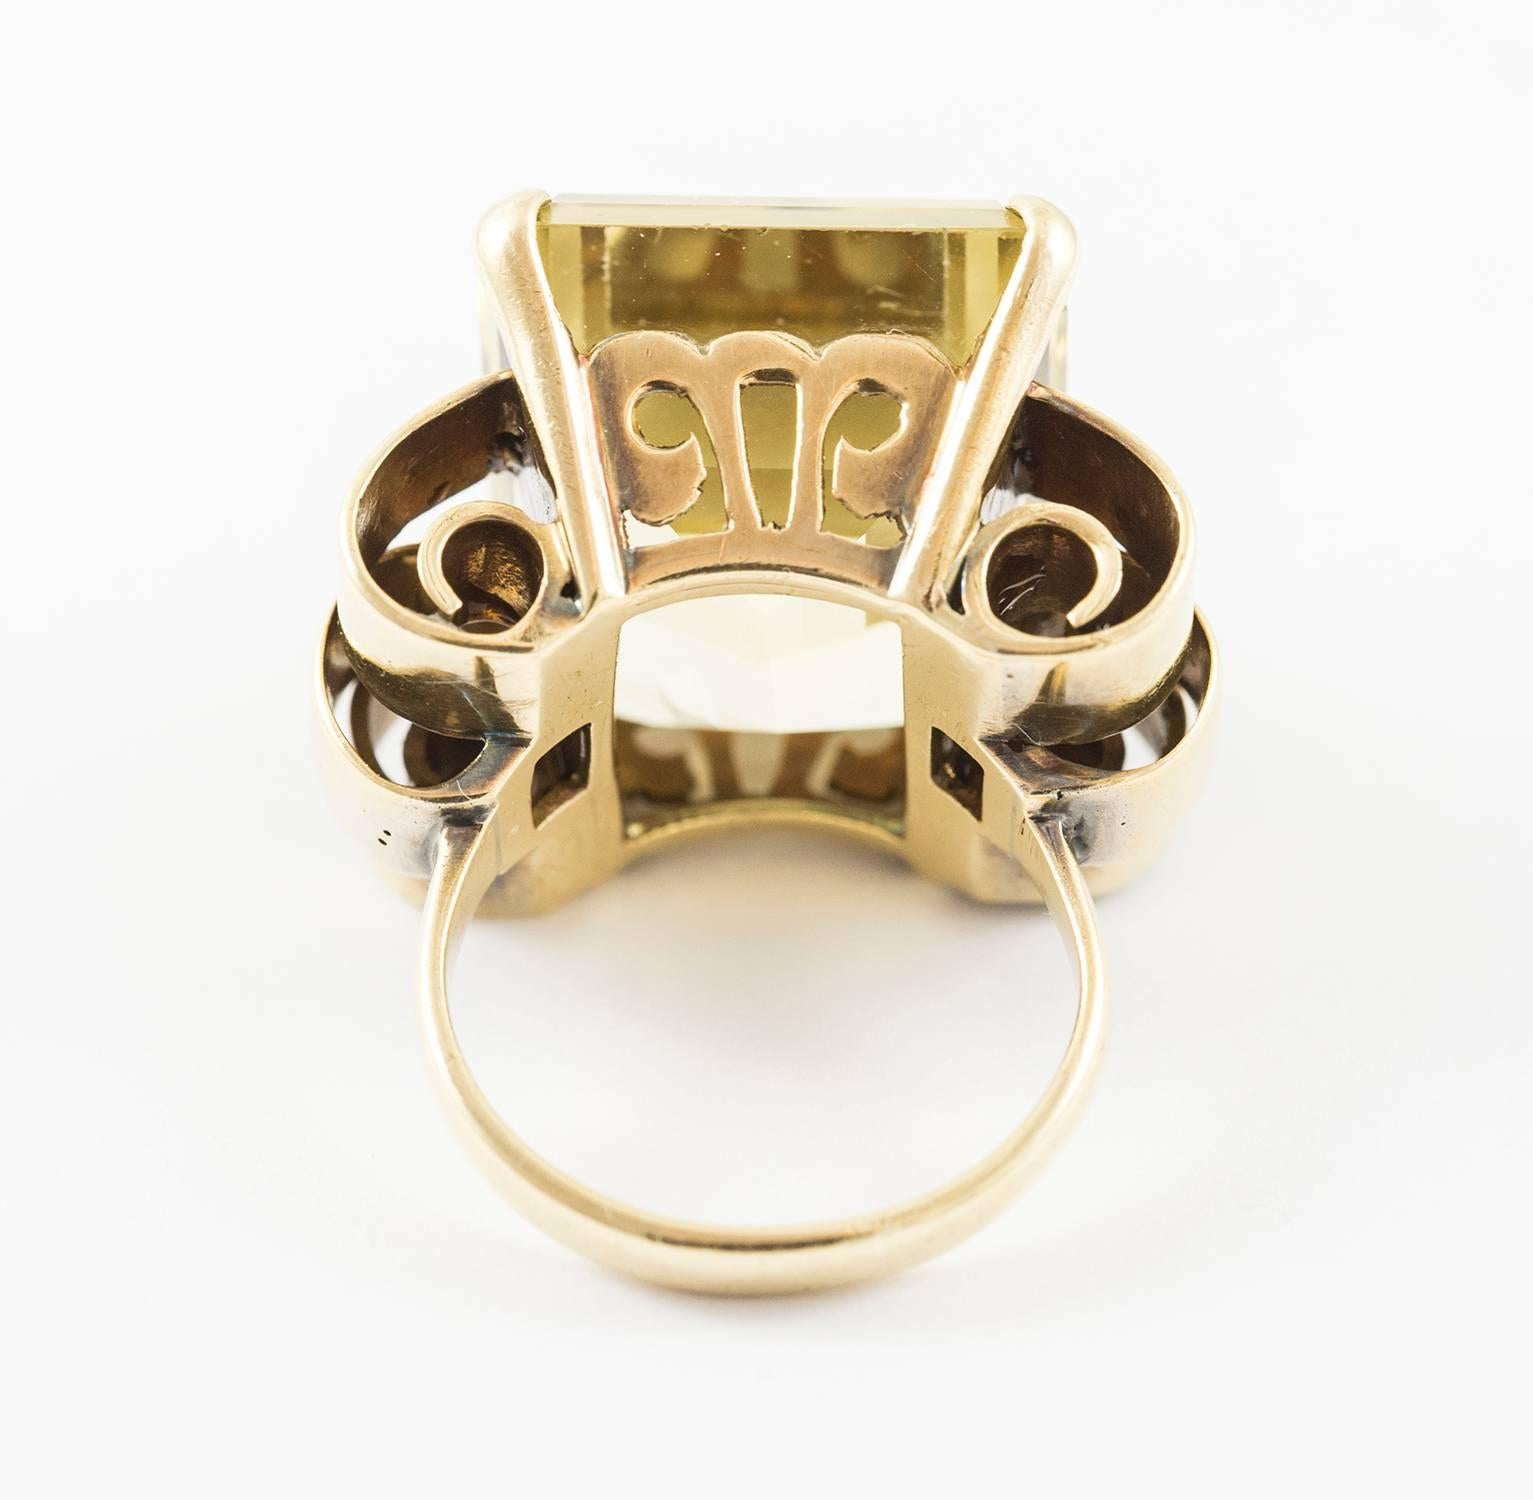 This dramatic ring is set in 18k yellow gold. It holds a 29 ct. bright, icy rectangular lemon quartz with a very good cut. The mount is custom made using a classic strong retro design, typical of the 1940's. This ring is bold and handsome. The ring